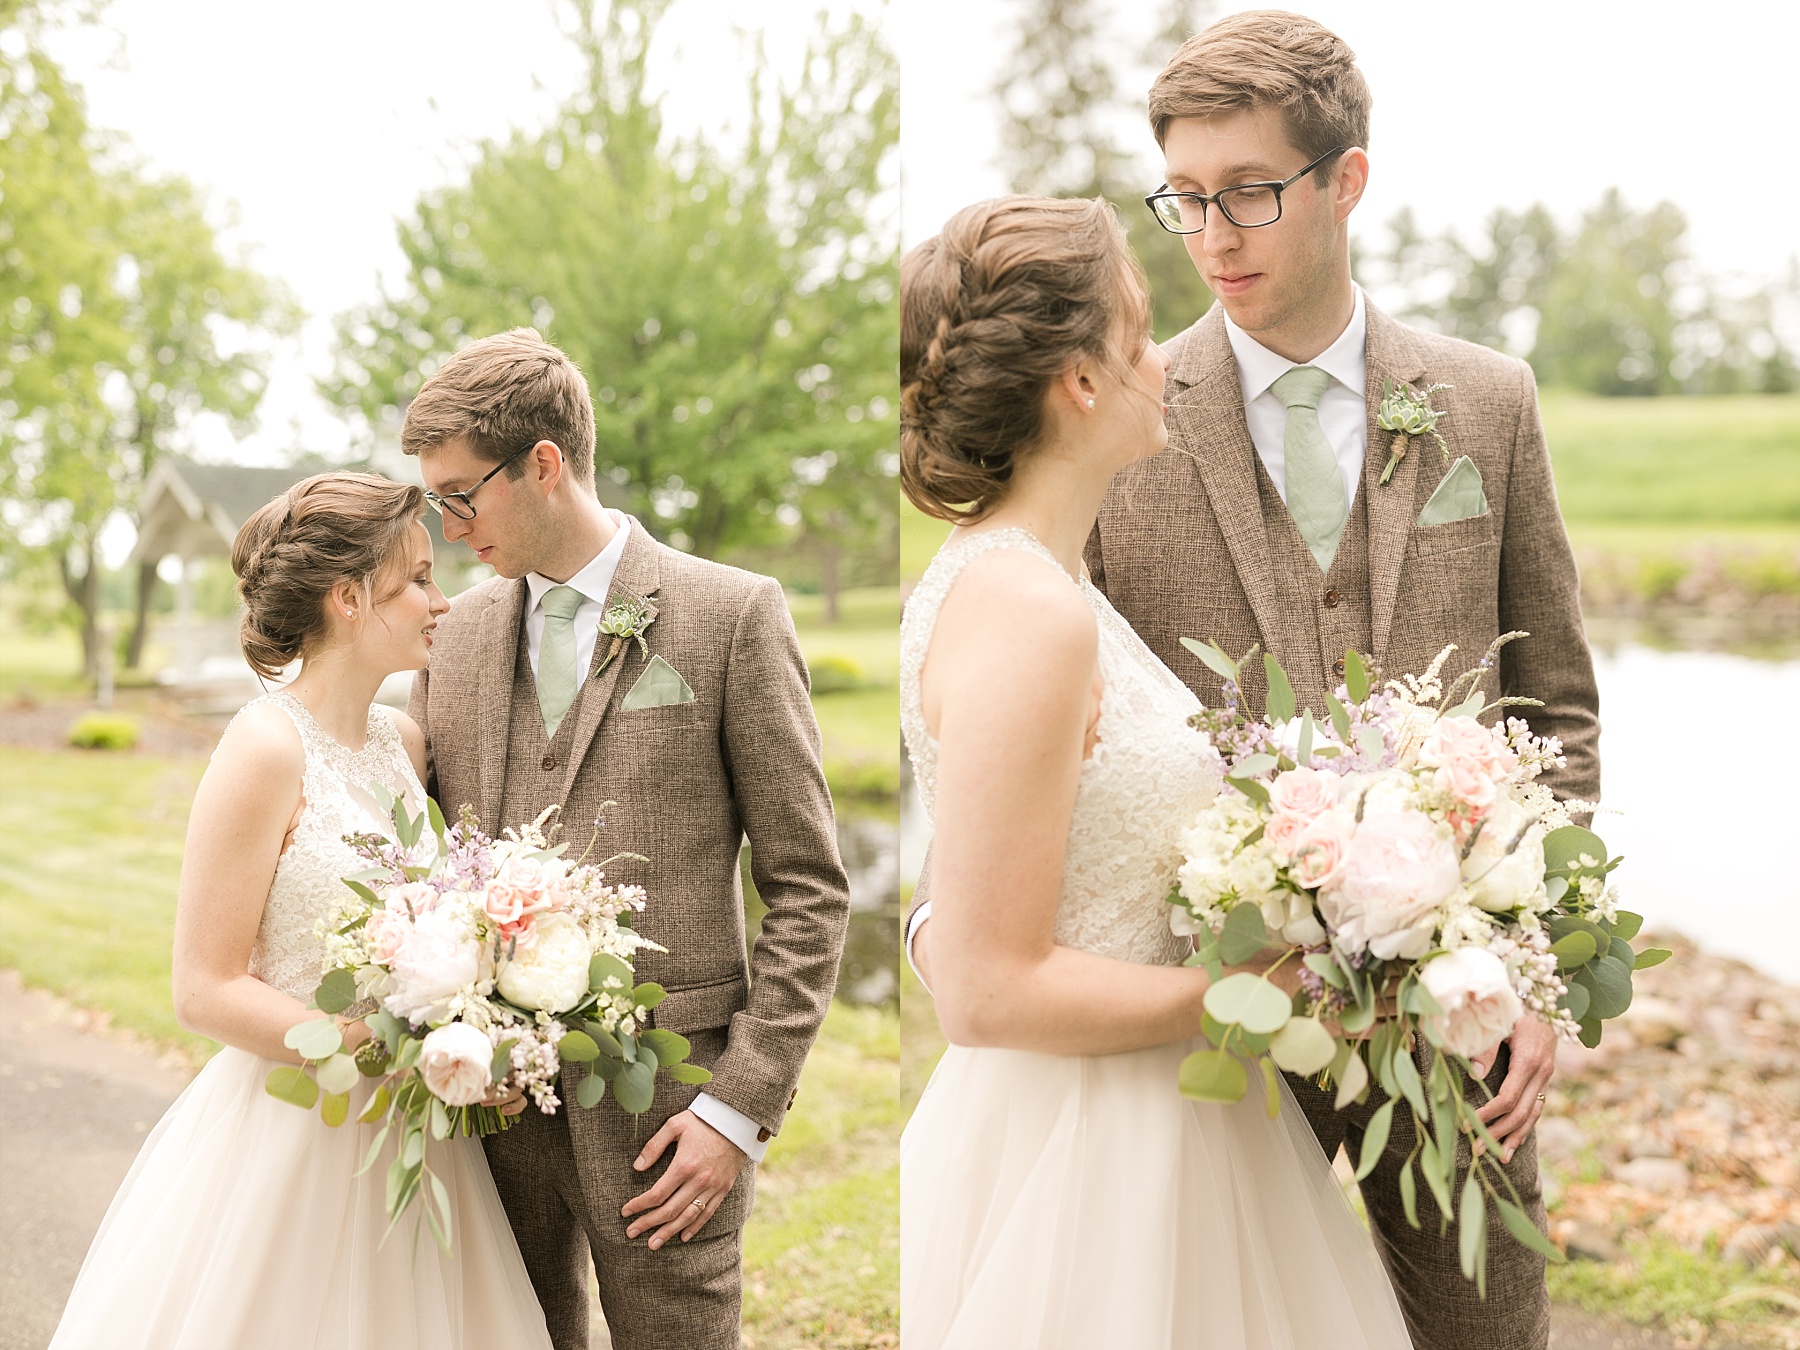 Delicate details and tender moments surrounded Bailey & Jenna for their Lake Wissota Golf wedding.